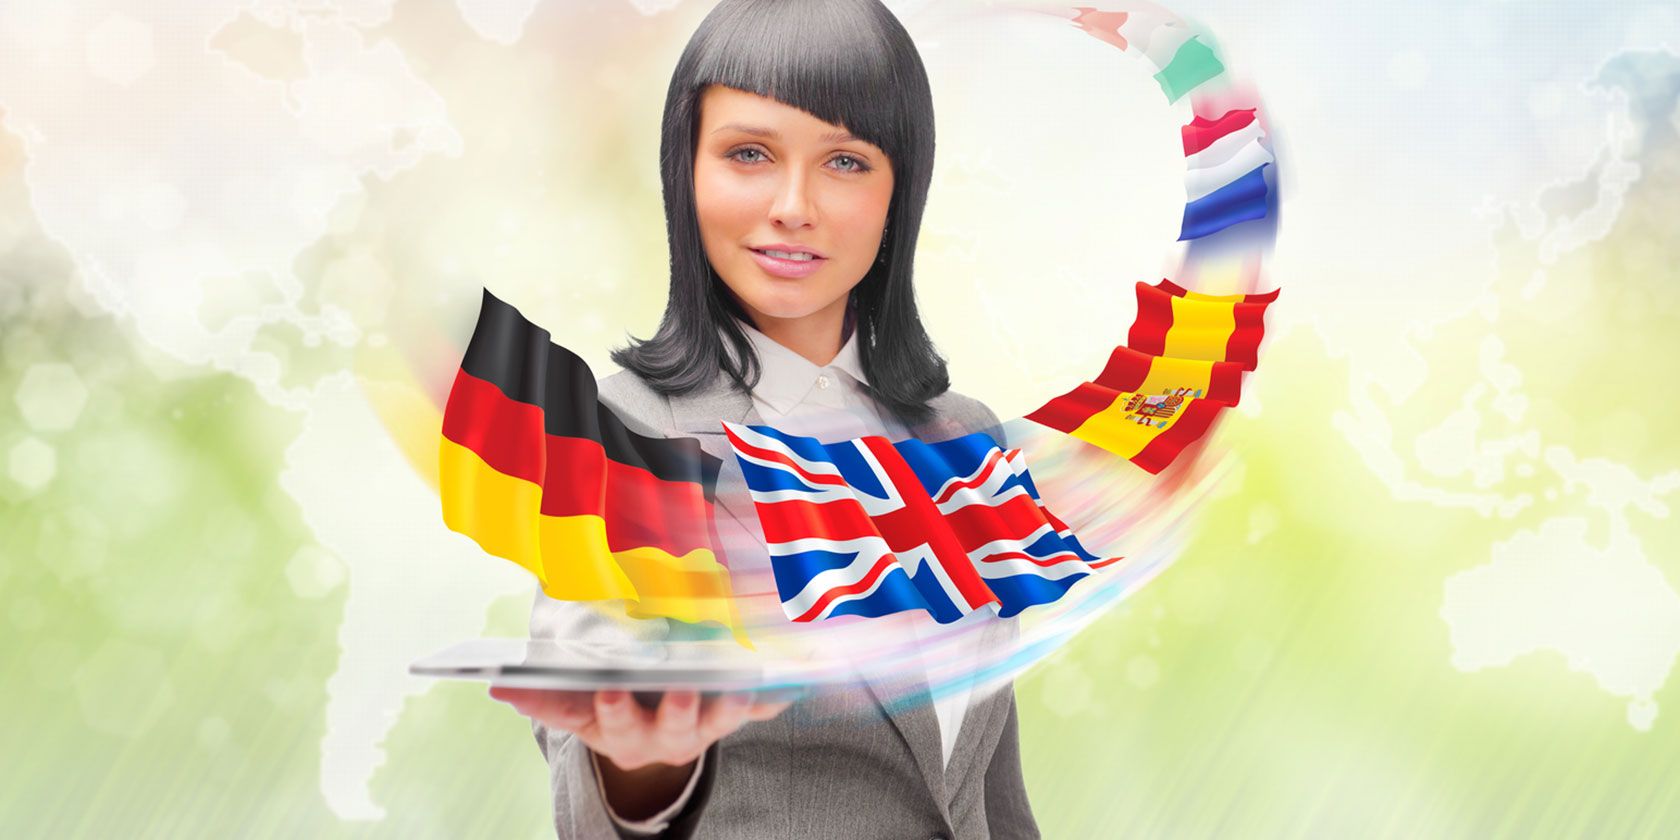 Woman holding tablet with country flags flying over it